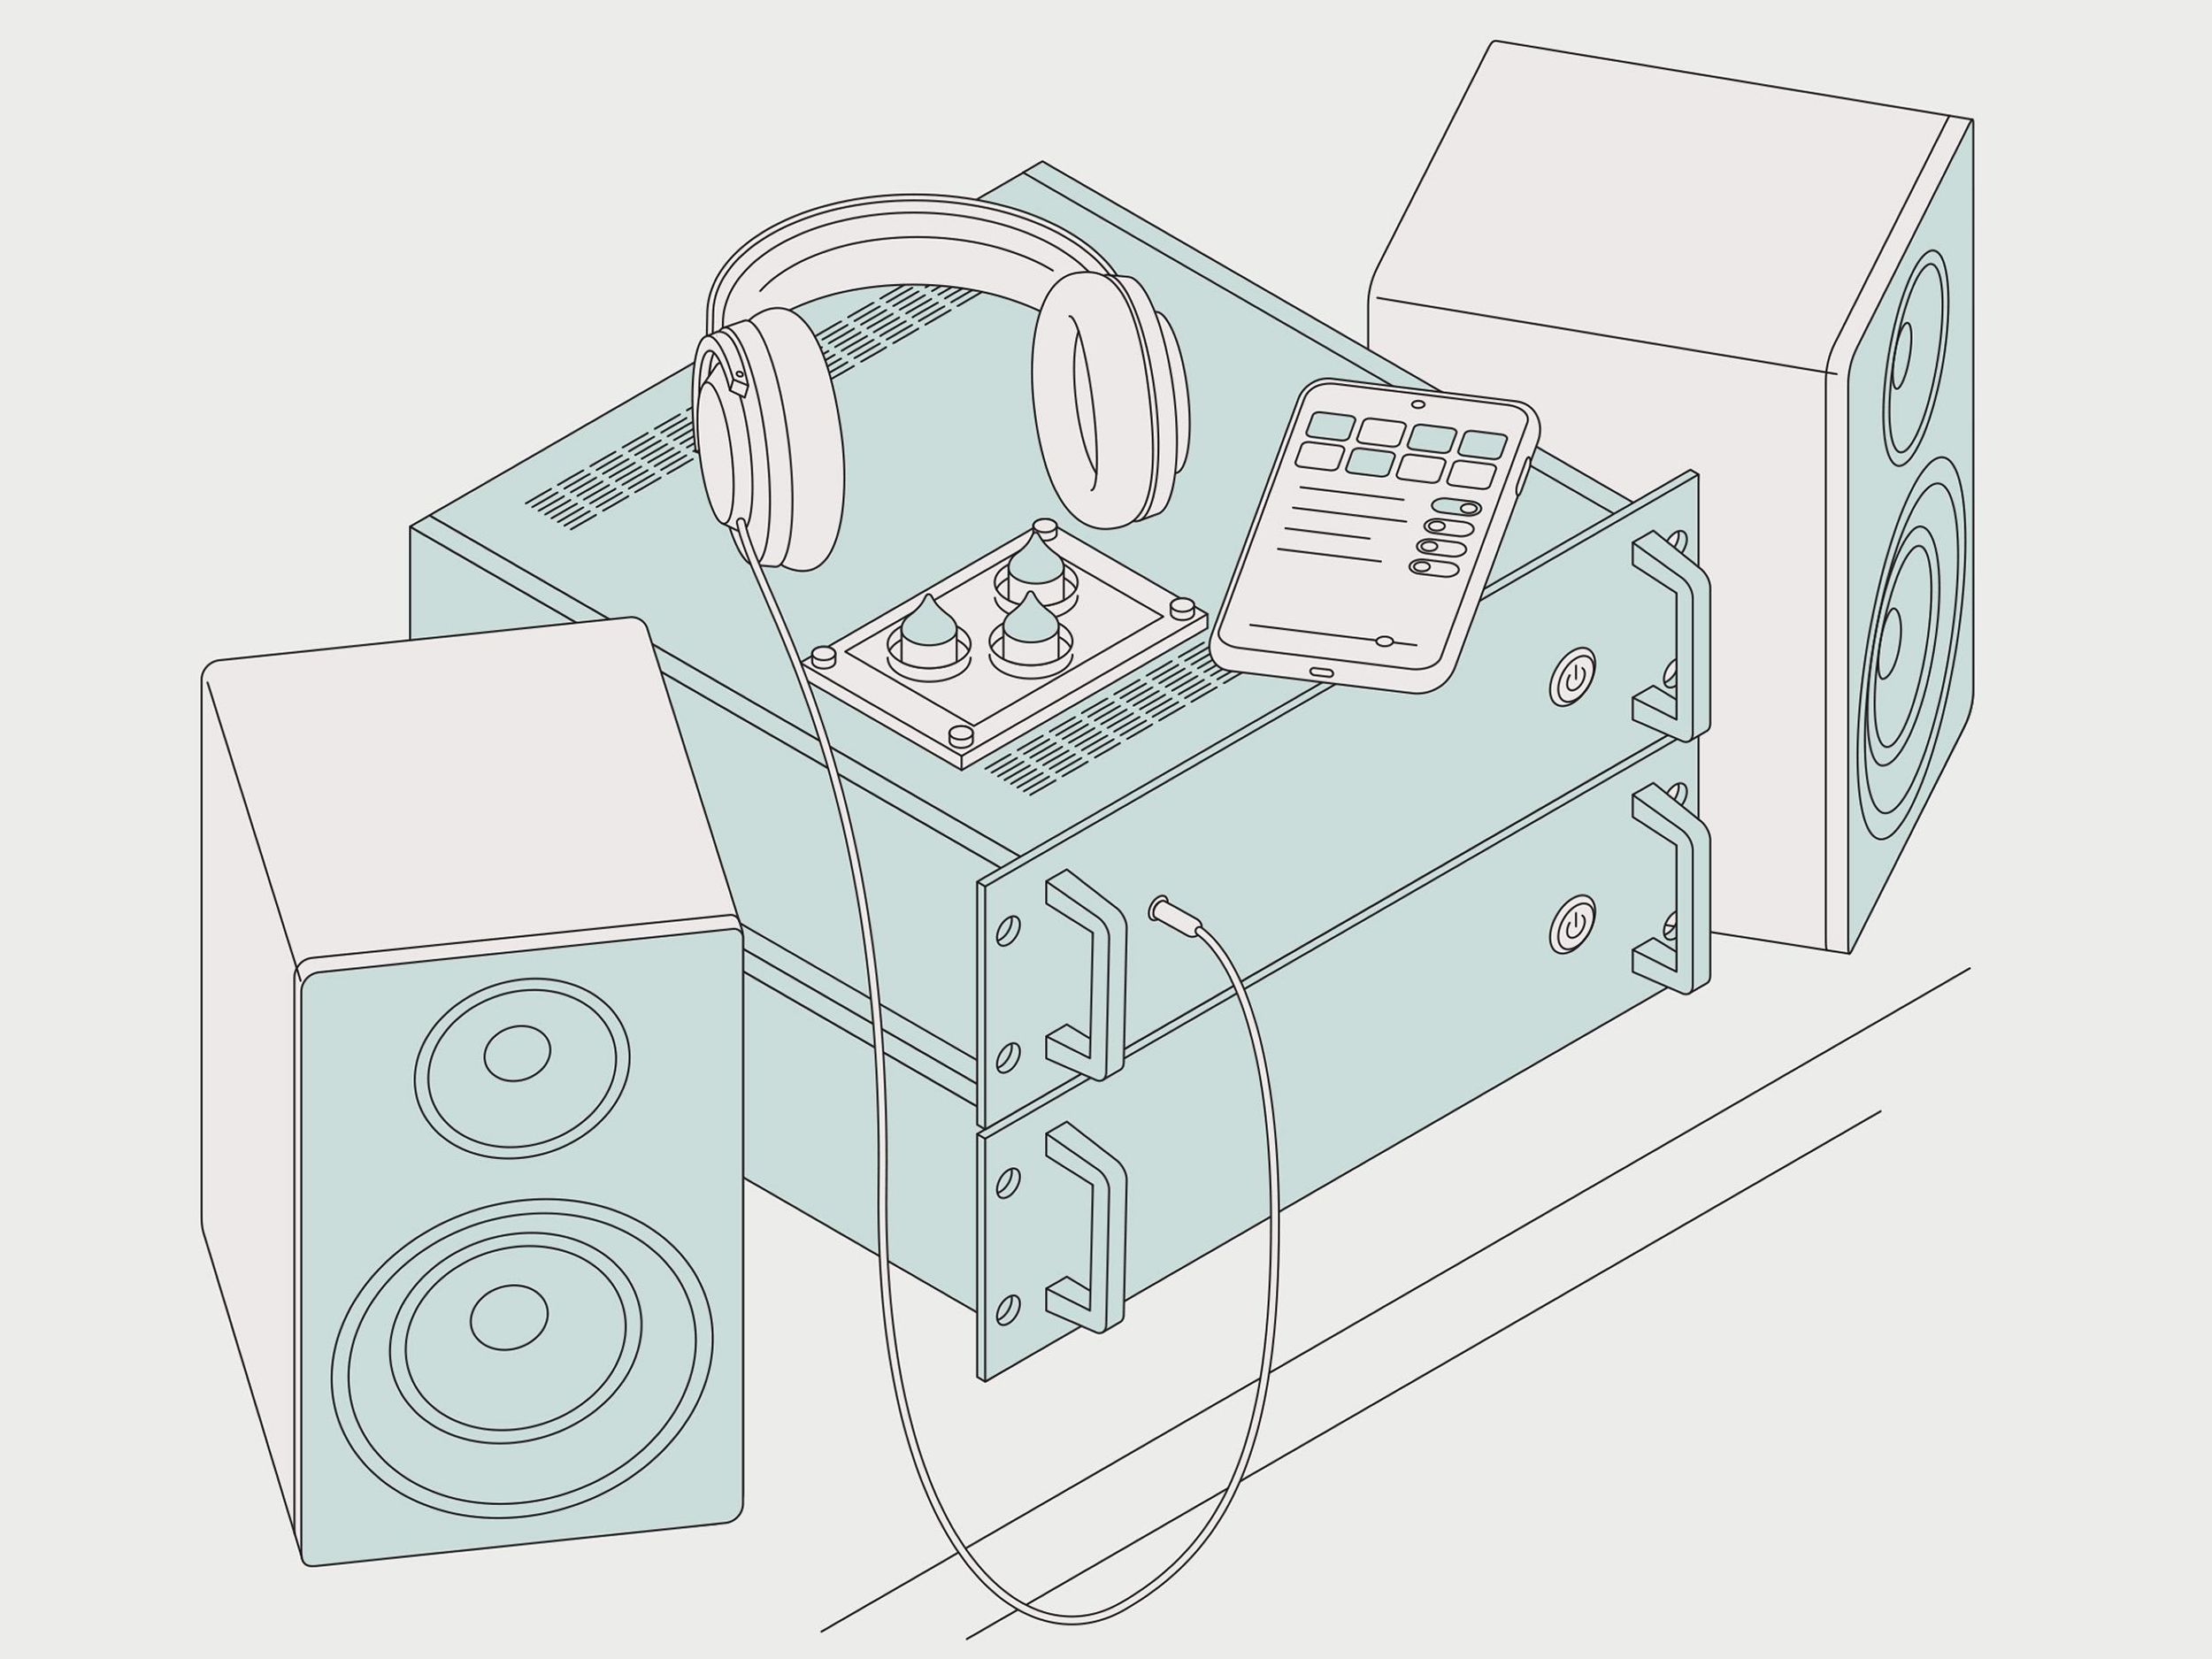 An illustration of an amplifier, speakers and a pair of headphones